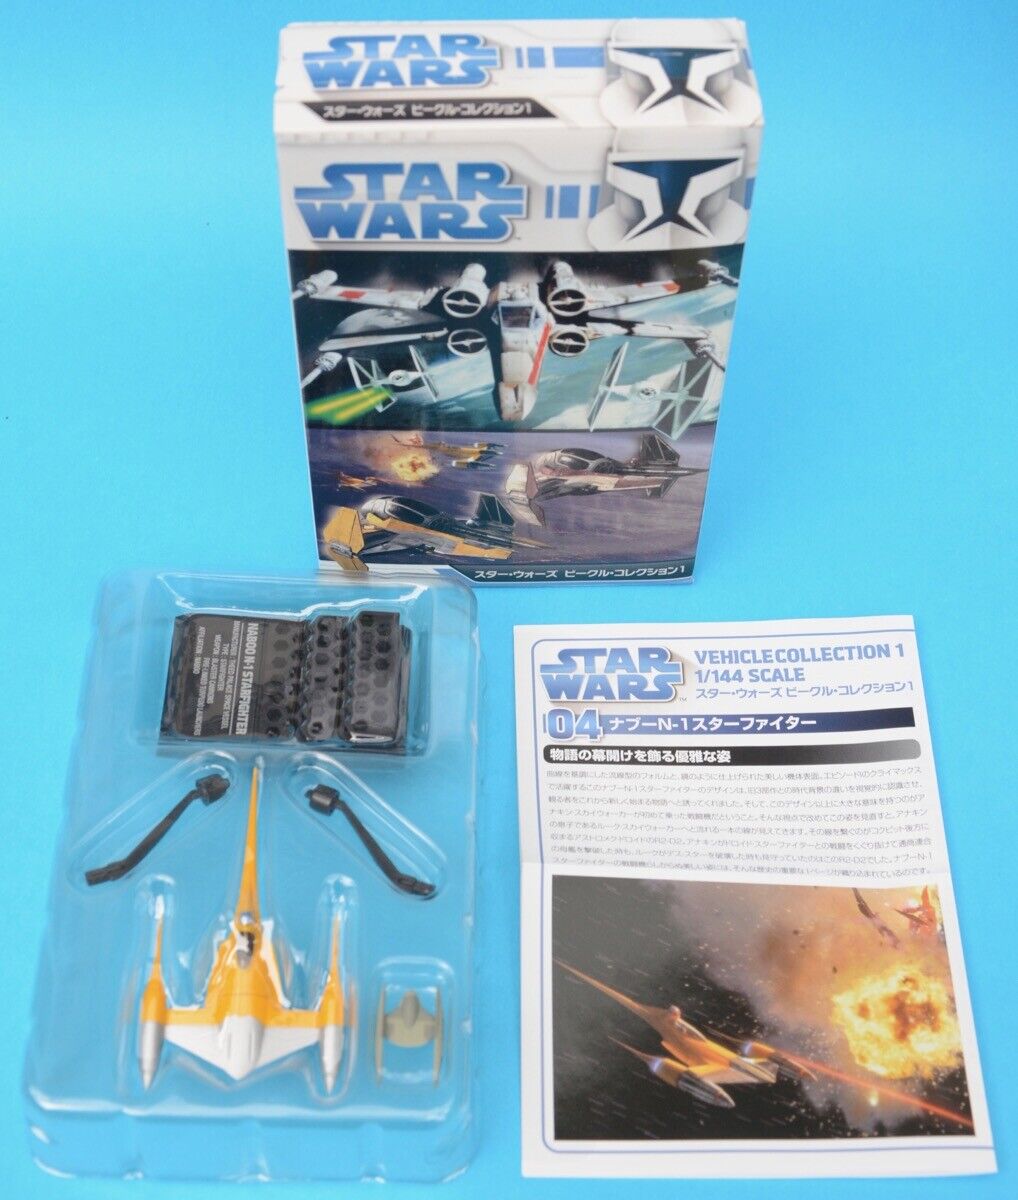 F-toys Star Wars - Vehicle Collection 1 - #04 NABOO N-1 STARFIGHTER - 1/144 MIB